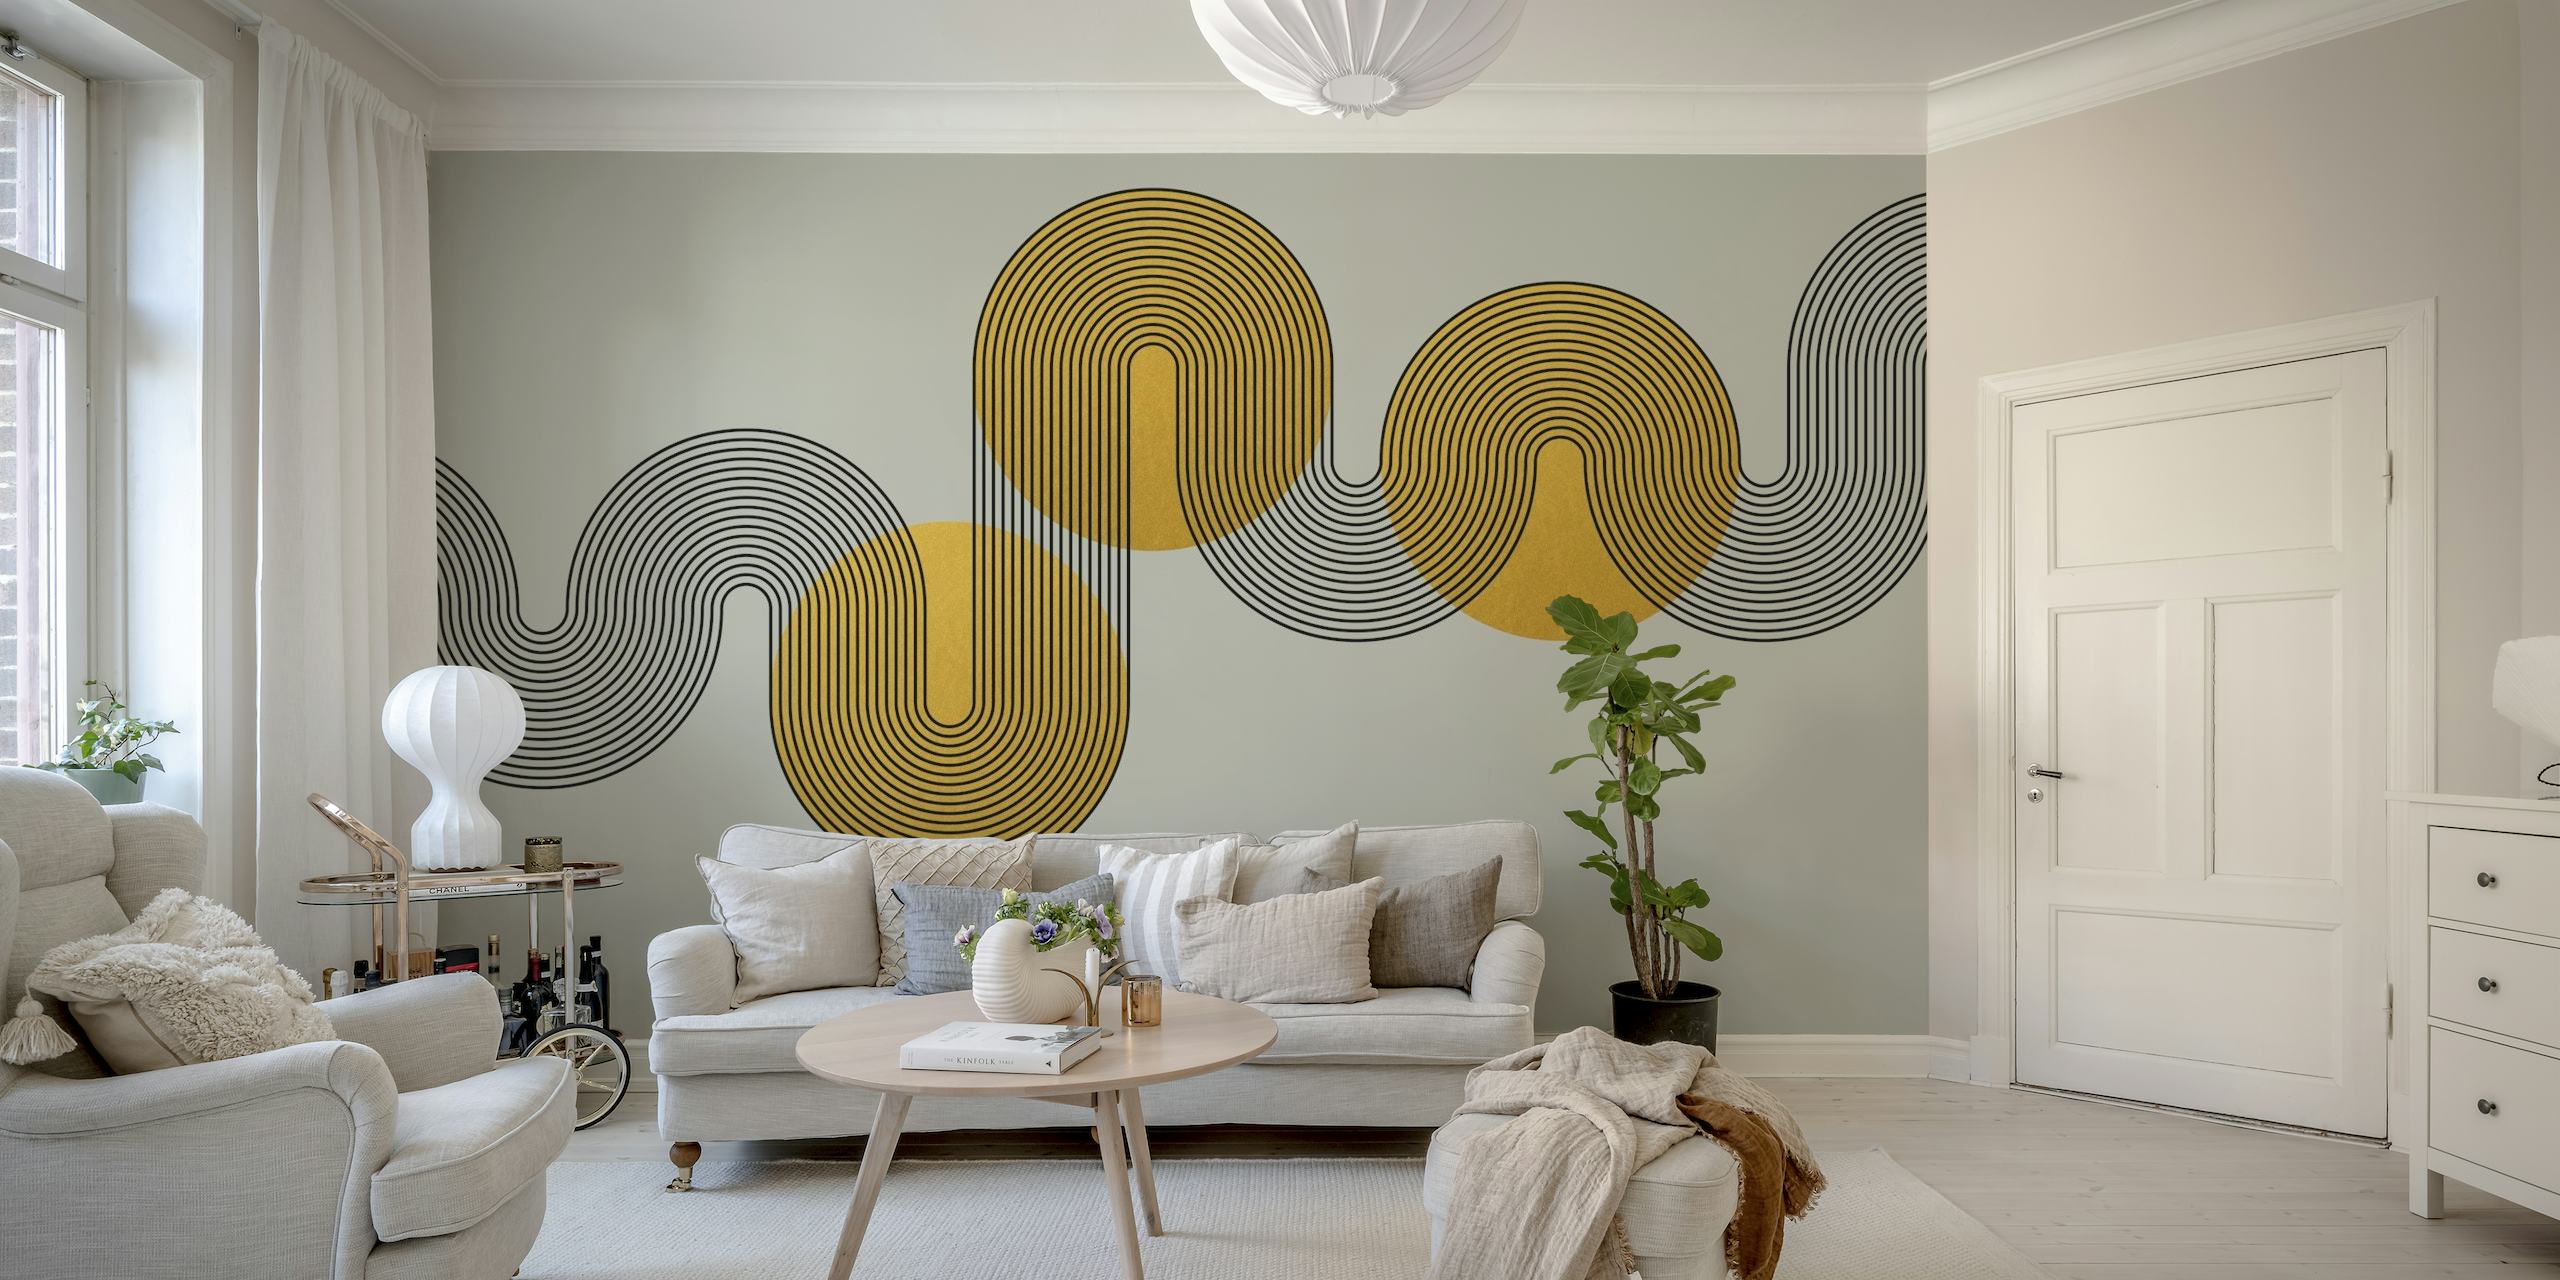 Abstract Art Deco style wall mural with geometric shapes in gold and grey tones